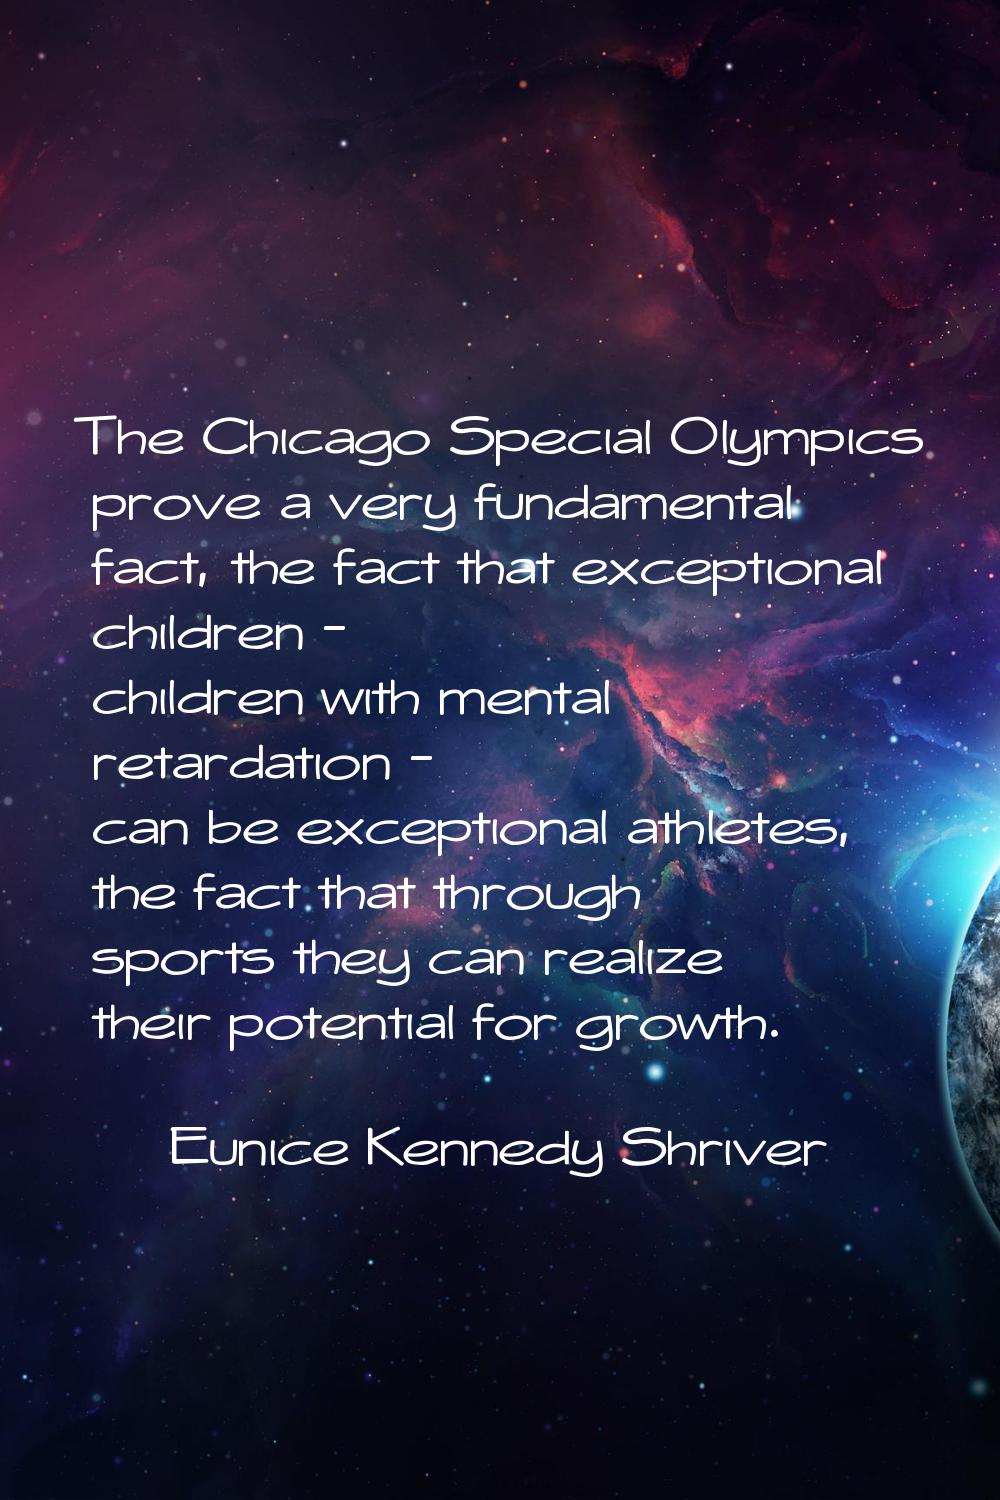 The Chicago Special Olympics prove a very fundamental fact, the fact that exceptional children - ch